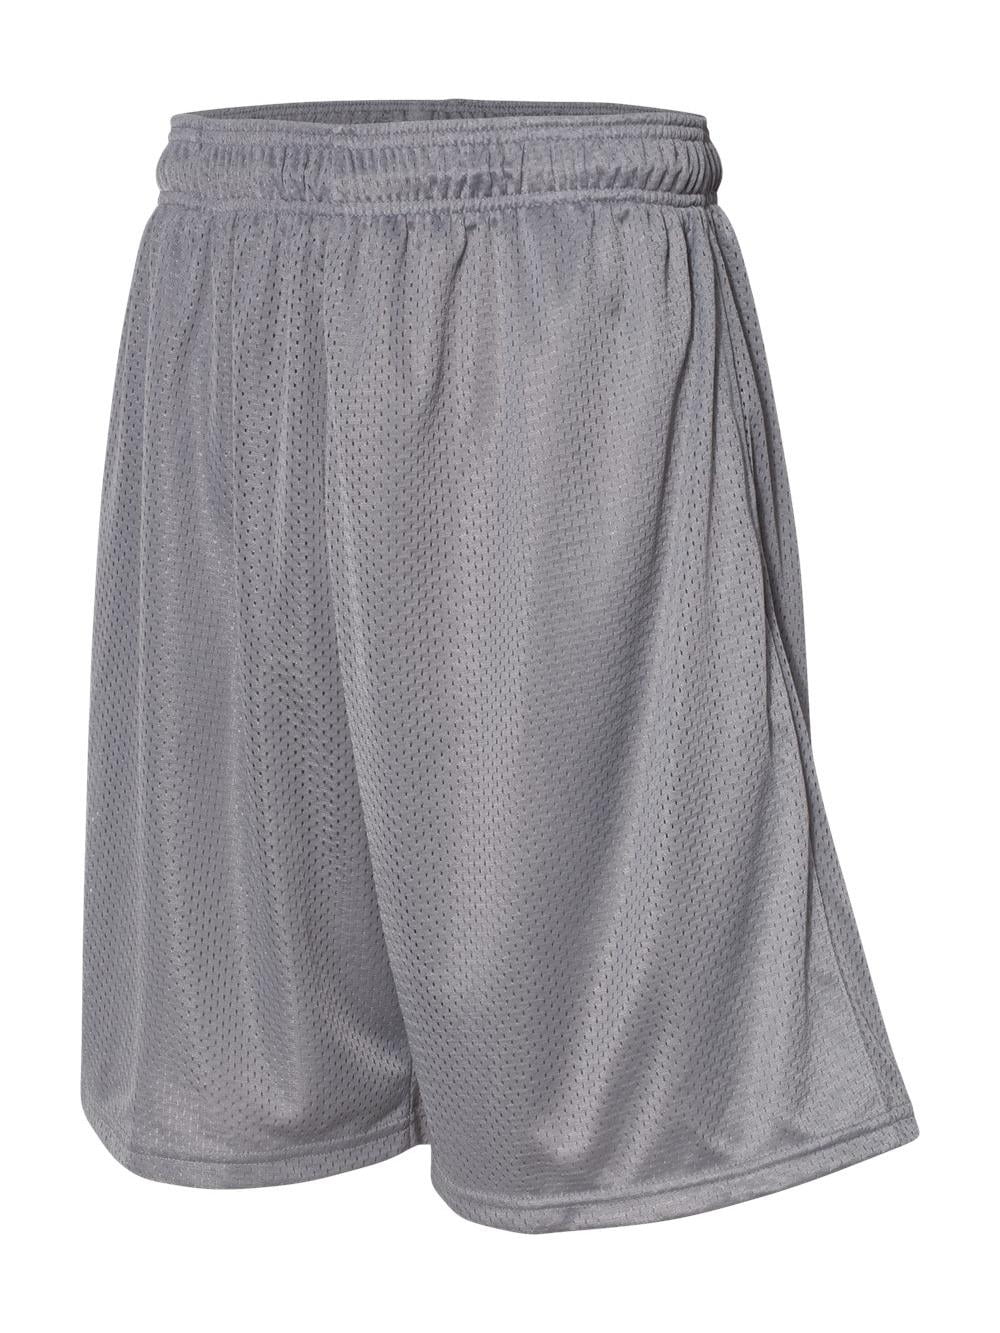 Russell Athletic Basketball Soccer Men's S-XL 2X 3XL Mesh Shorts Gym Rugby 